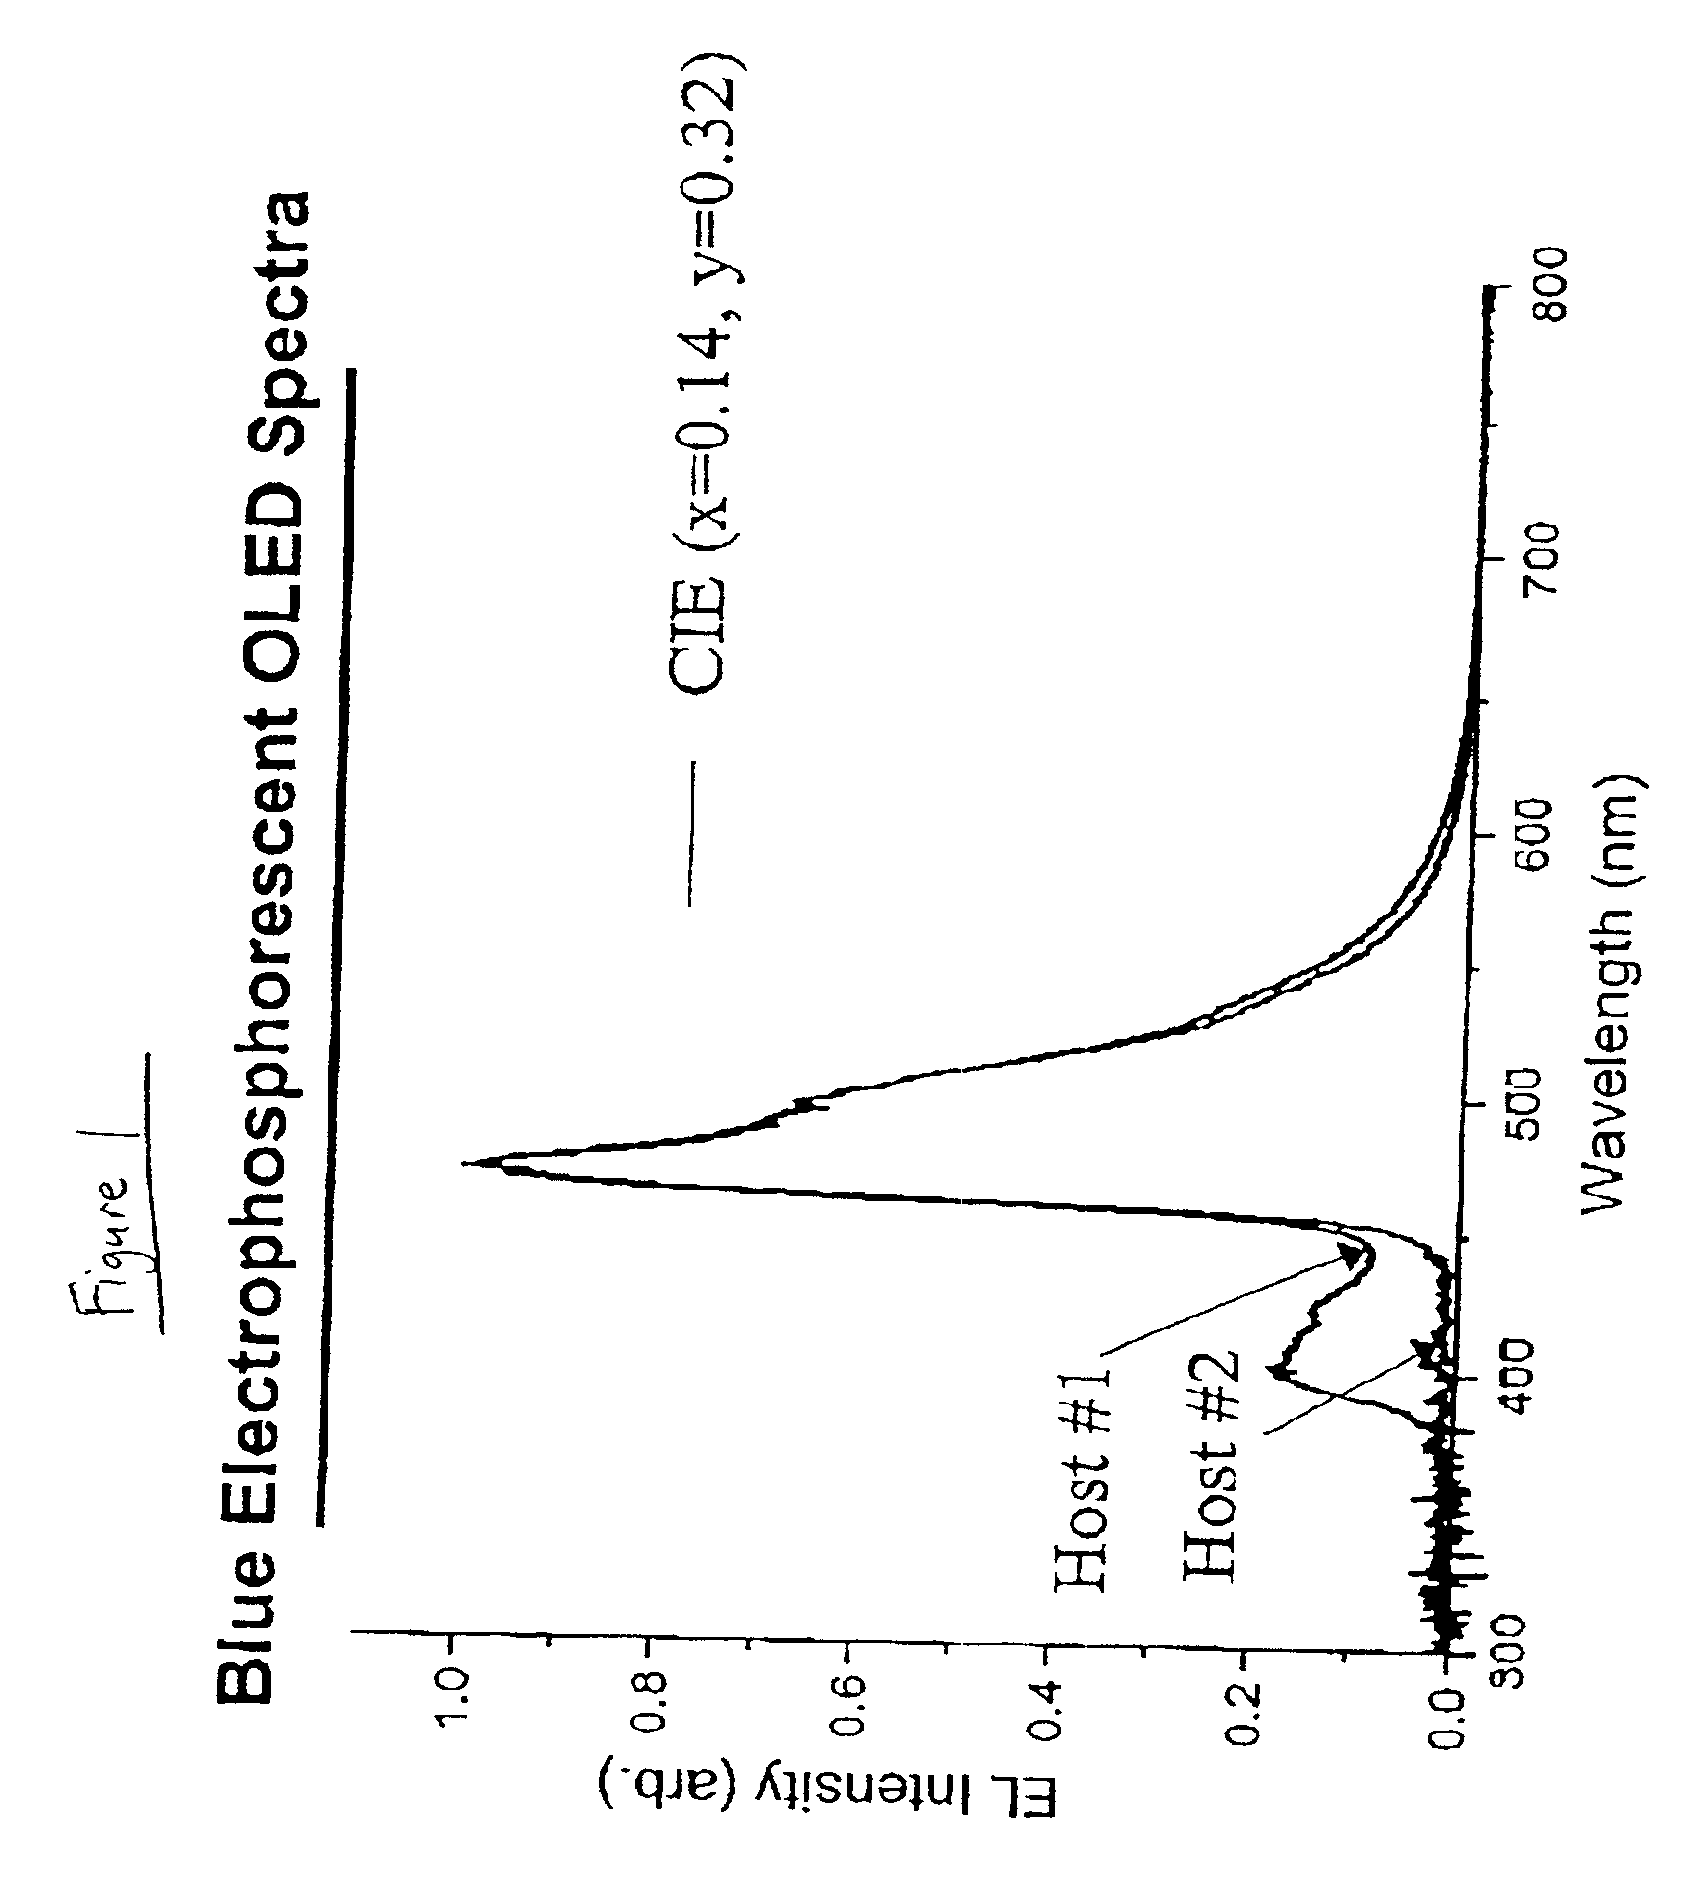 Double doped-layer, phosphorescent organic light emitting devices